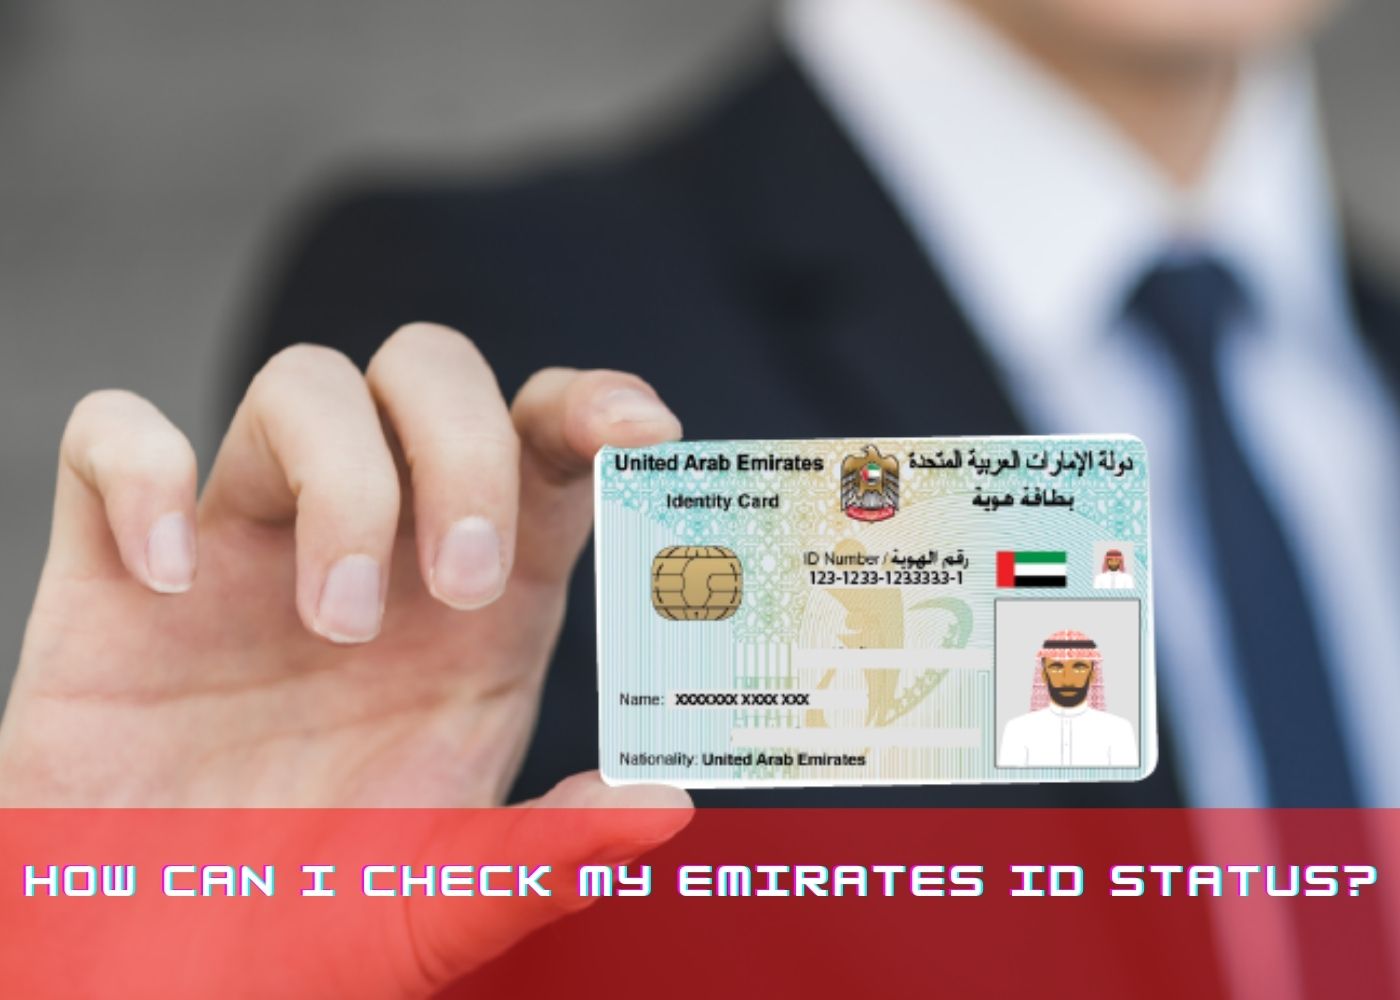 How can I check my Emirates ID status?